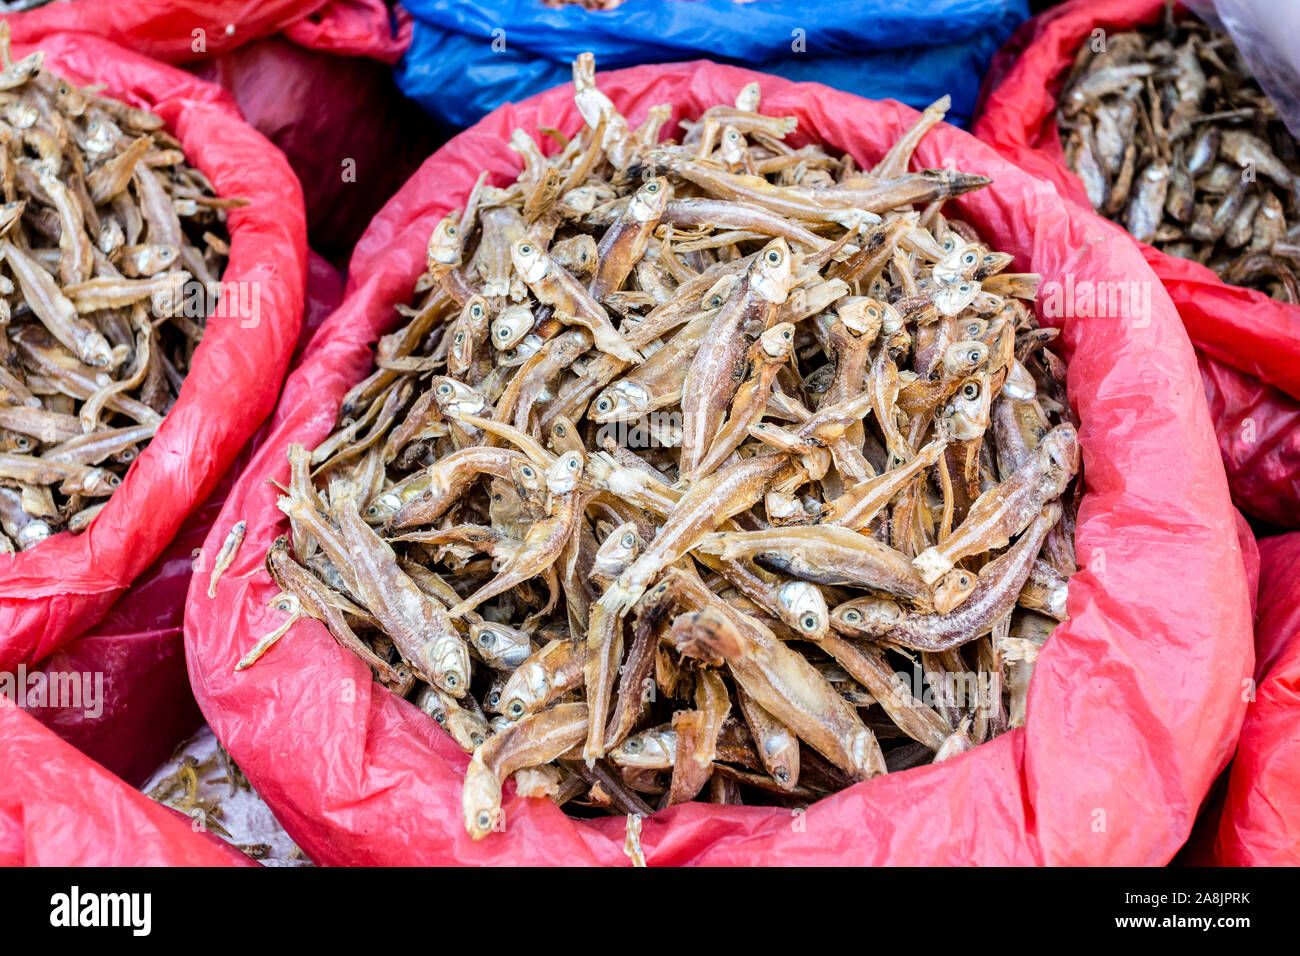 Download Bags Of Dried Fish High Resolution Stock Photography And Images Alamy Yellowimages Mockups